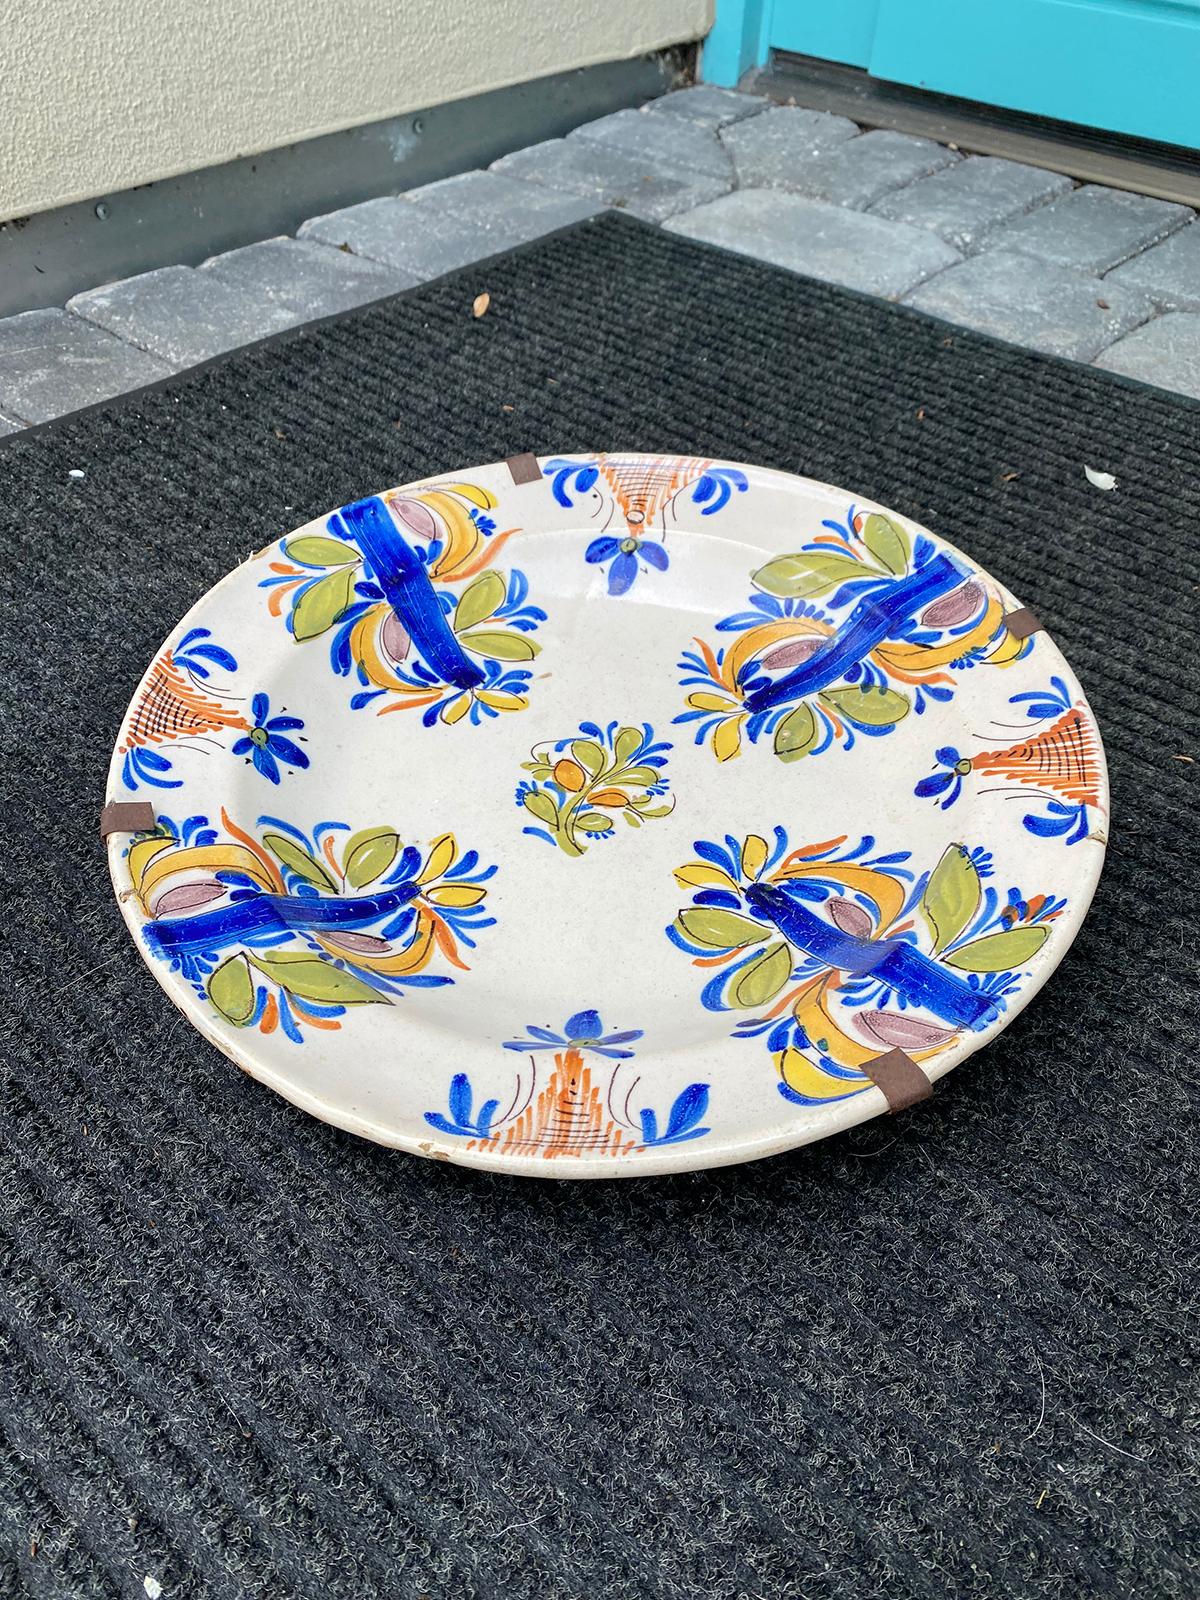 Polychromed 18th Century Delft Faience Polychrome Charger with Plate Hanger, Signed V.M.D. For Sale